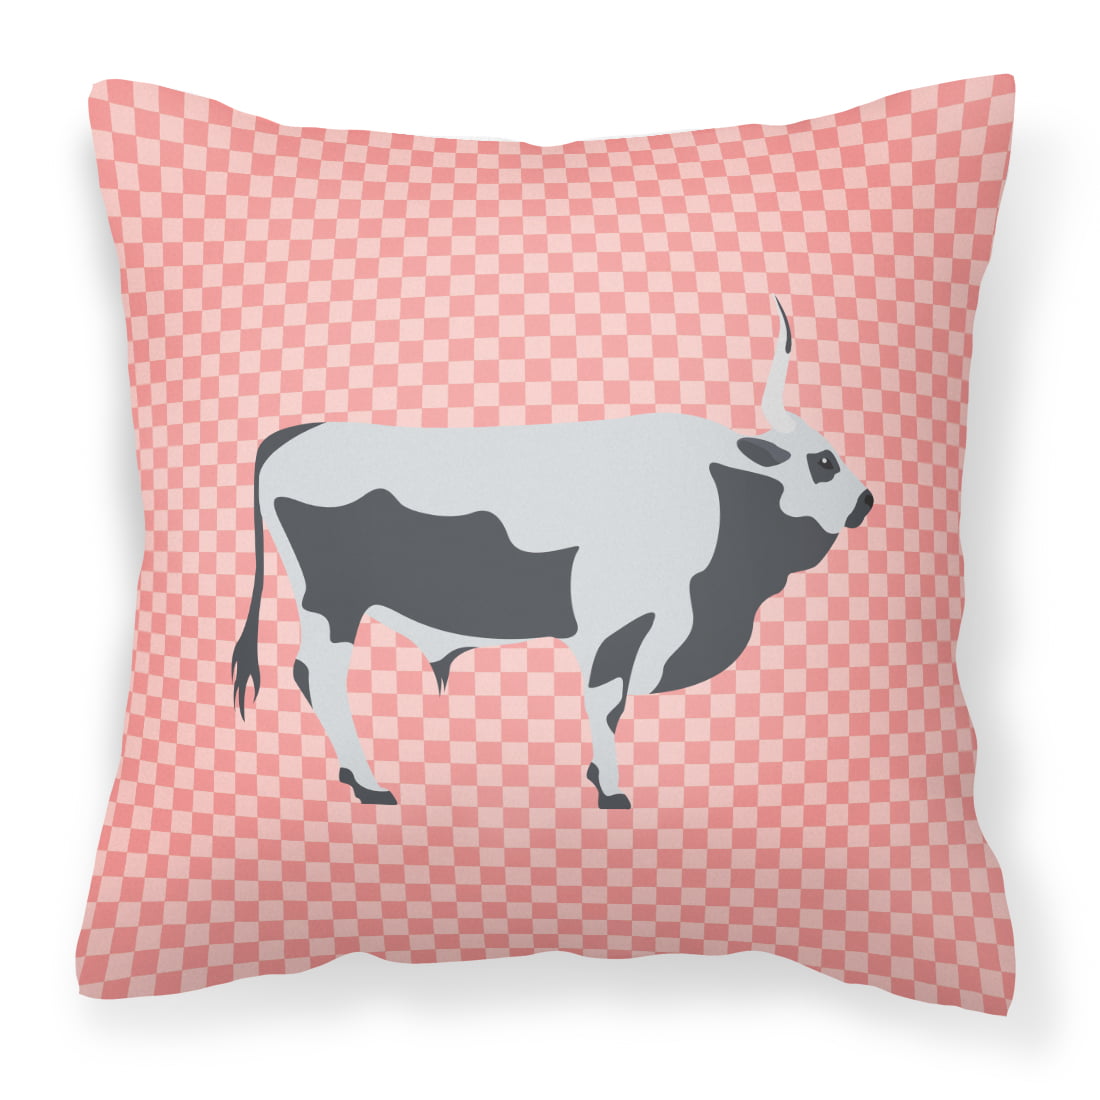 JensenDistributionServices Hungarian Grey Steppe Cow Pink Check Fabric Decorative Pillow - 14 x 14 in.